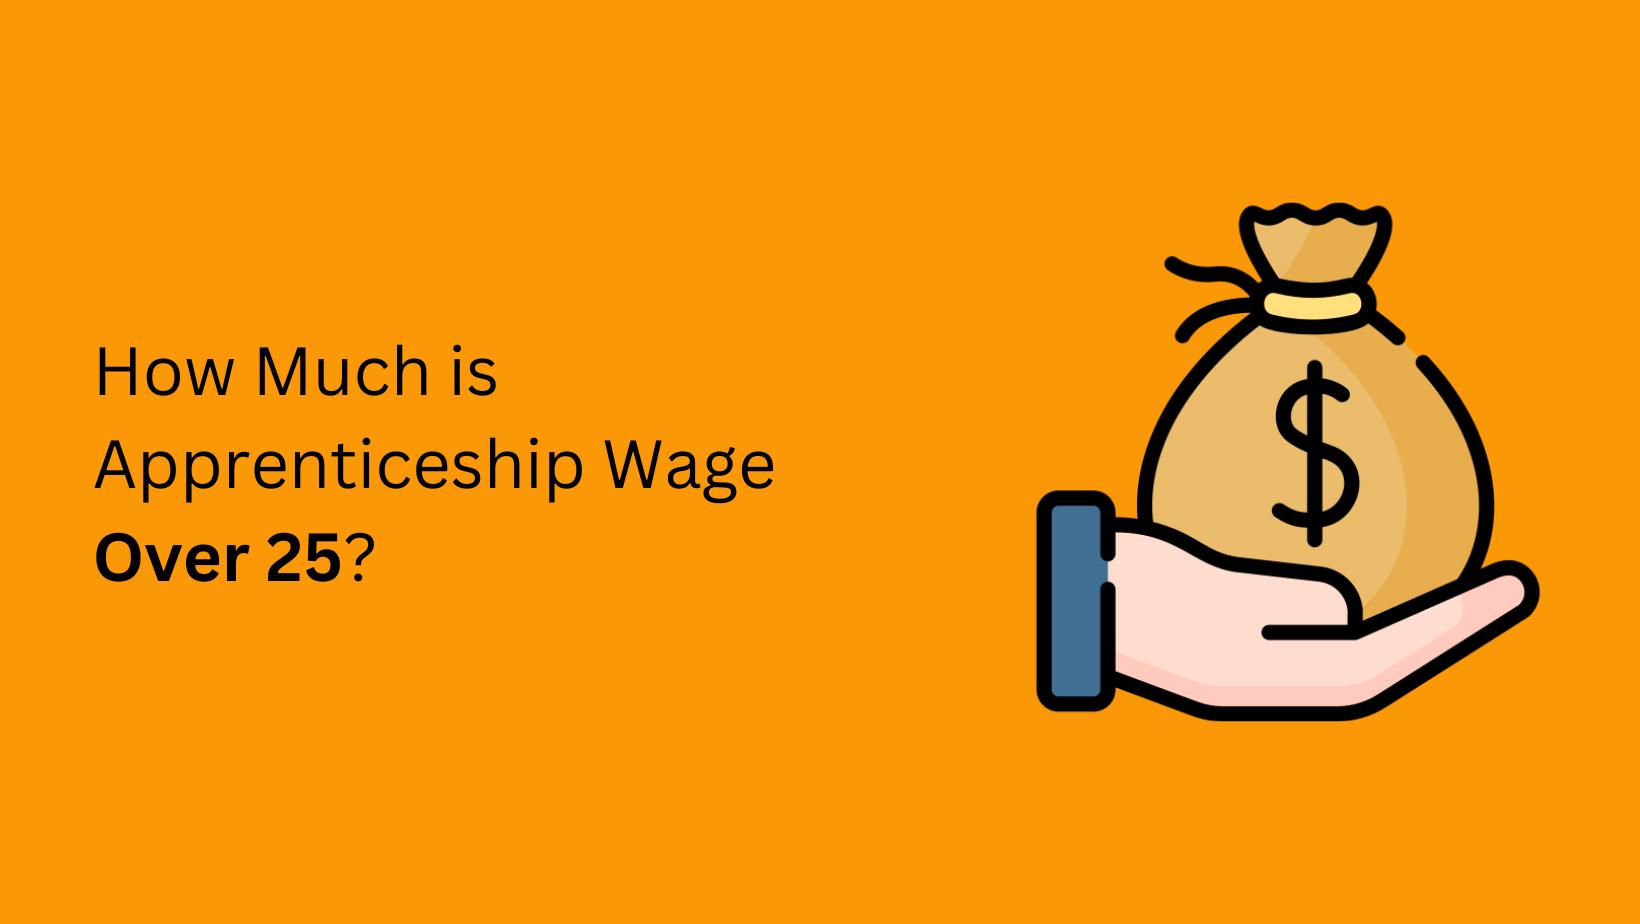 How Much is Apprenticeship Wage Over 25